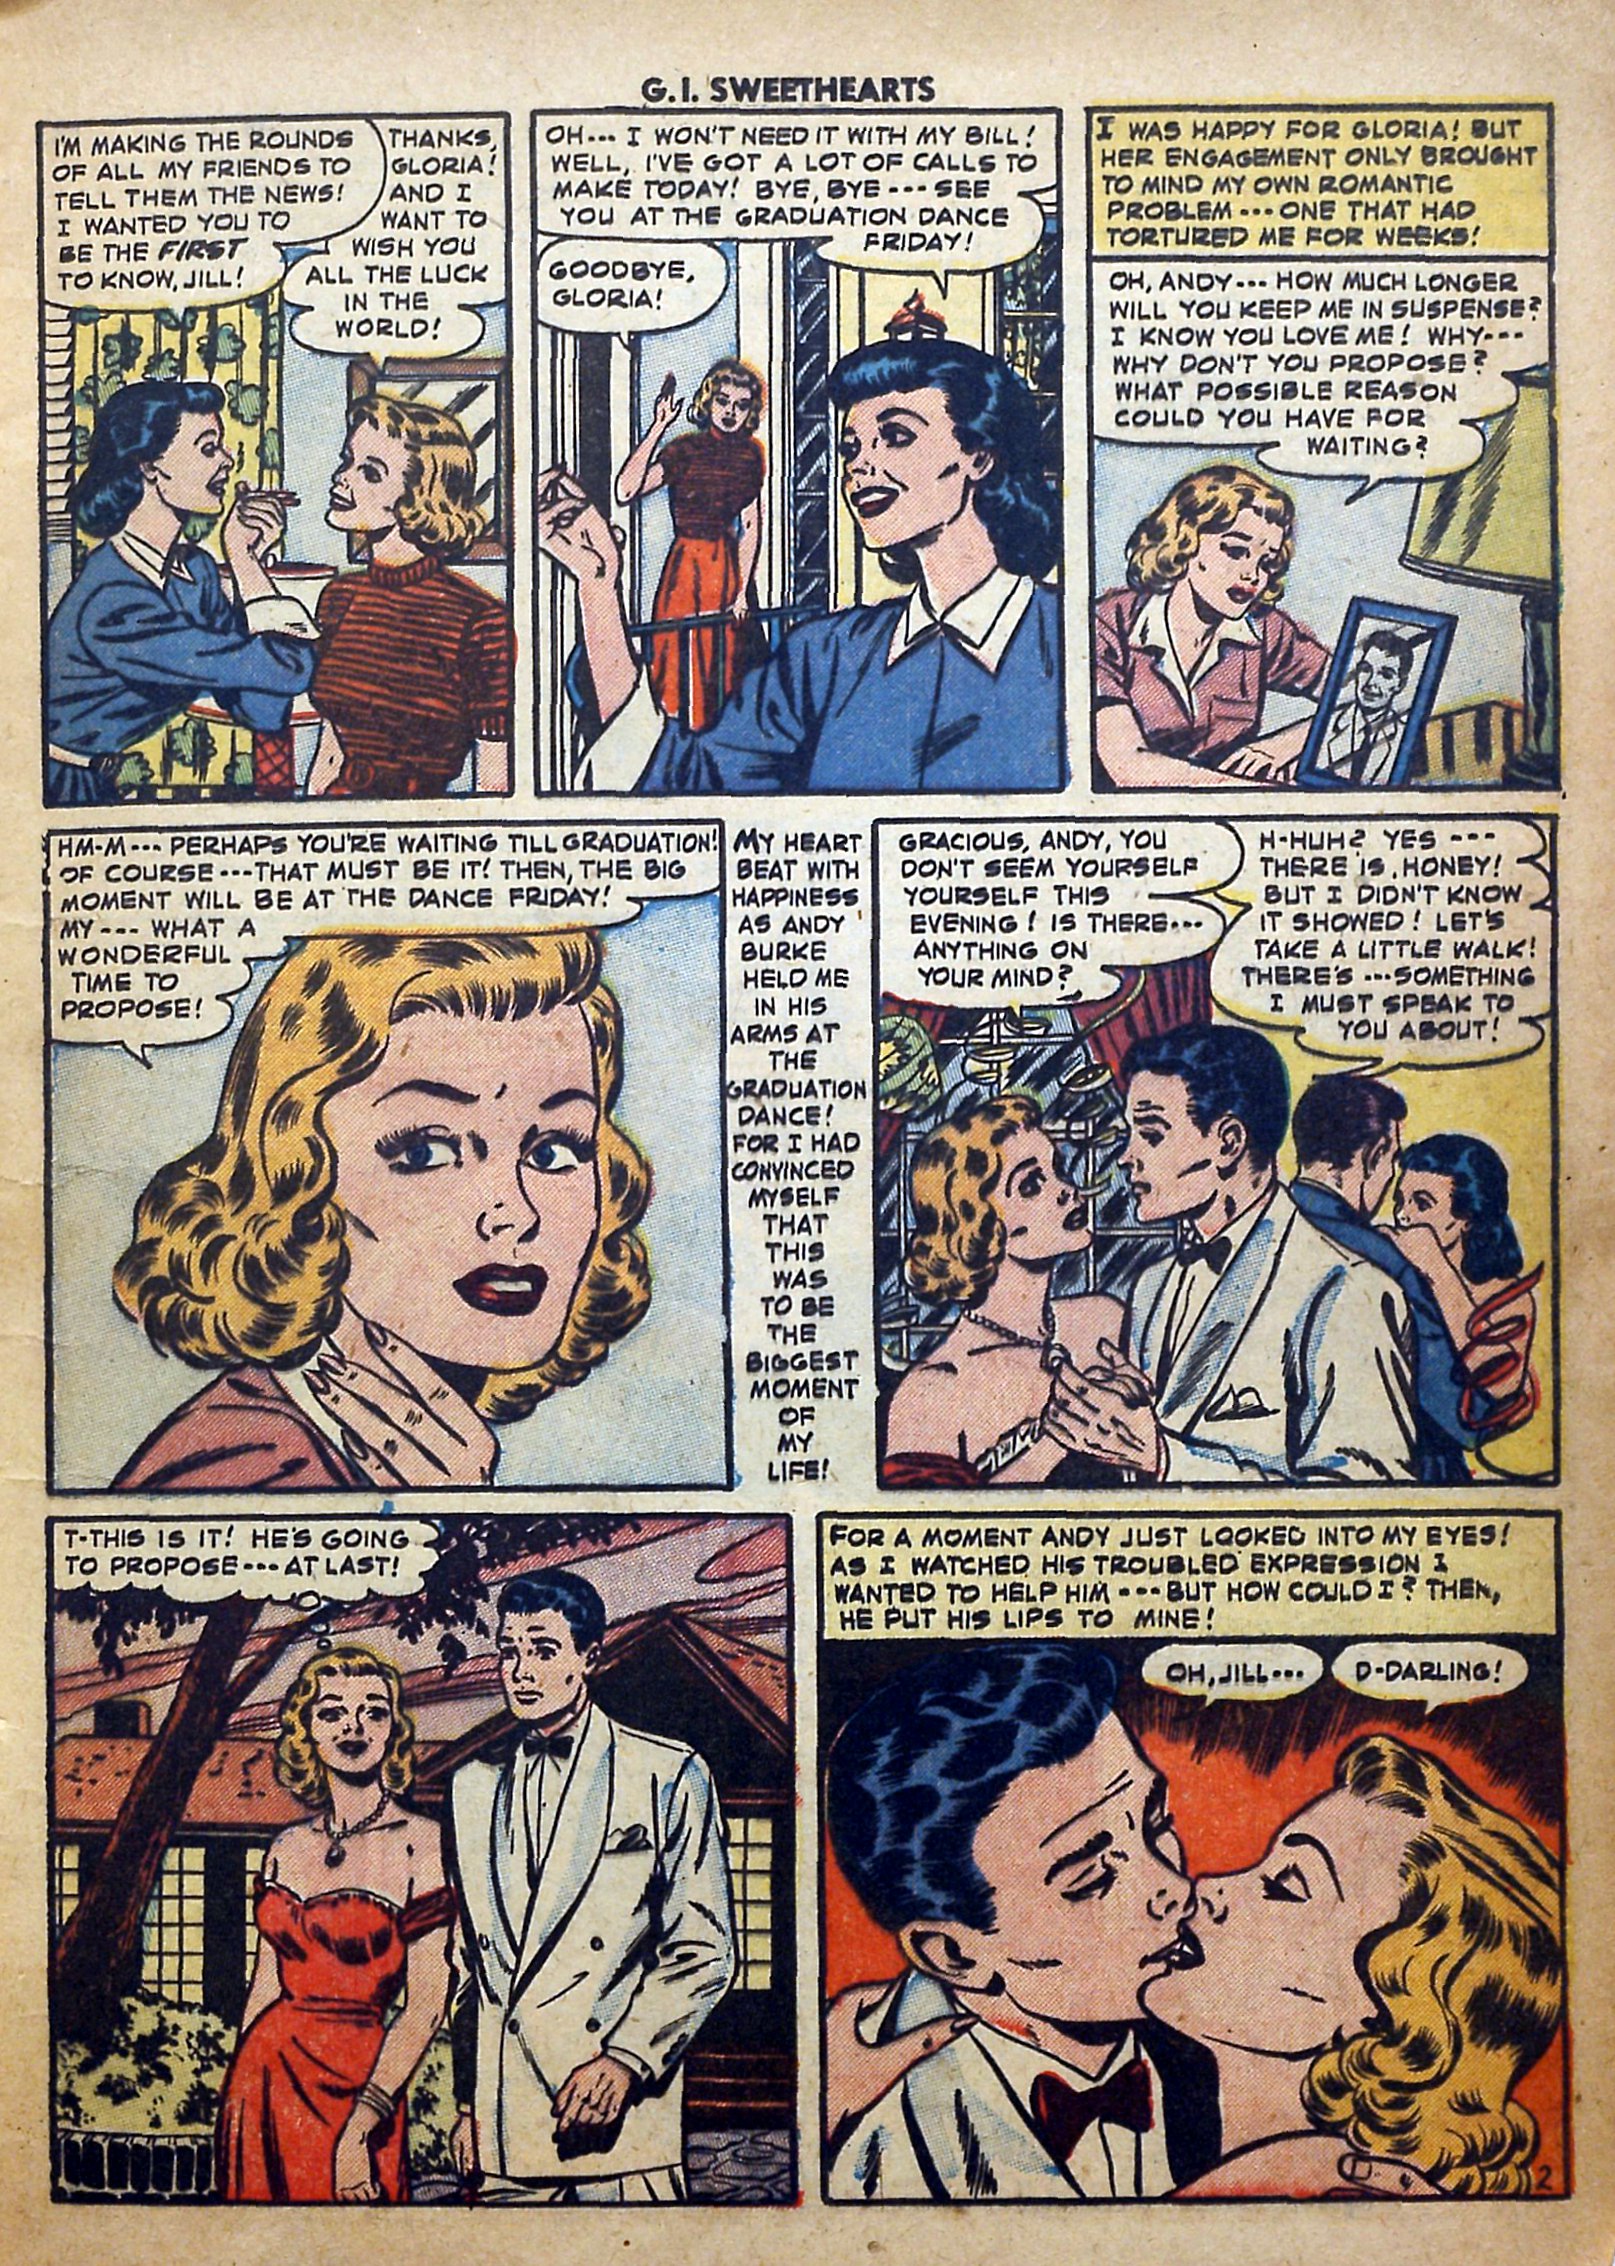 Read online G.I. Sweethearts comic -  Issue #39 - 13